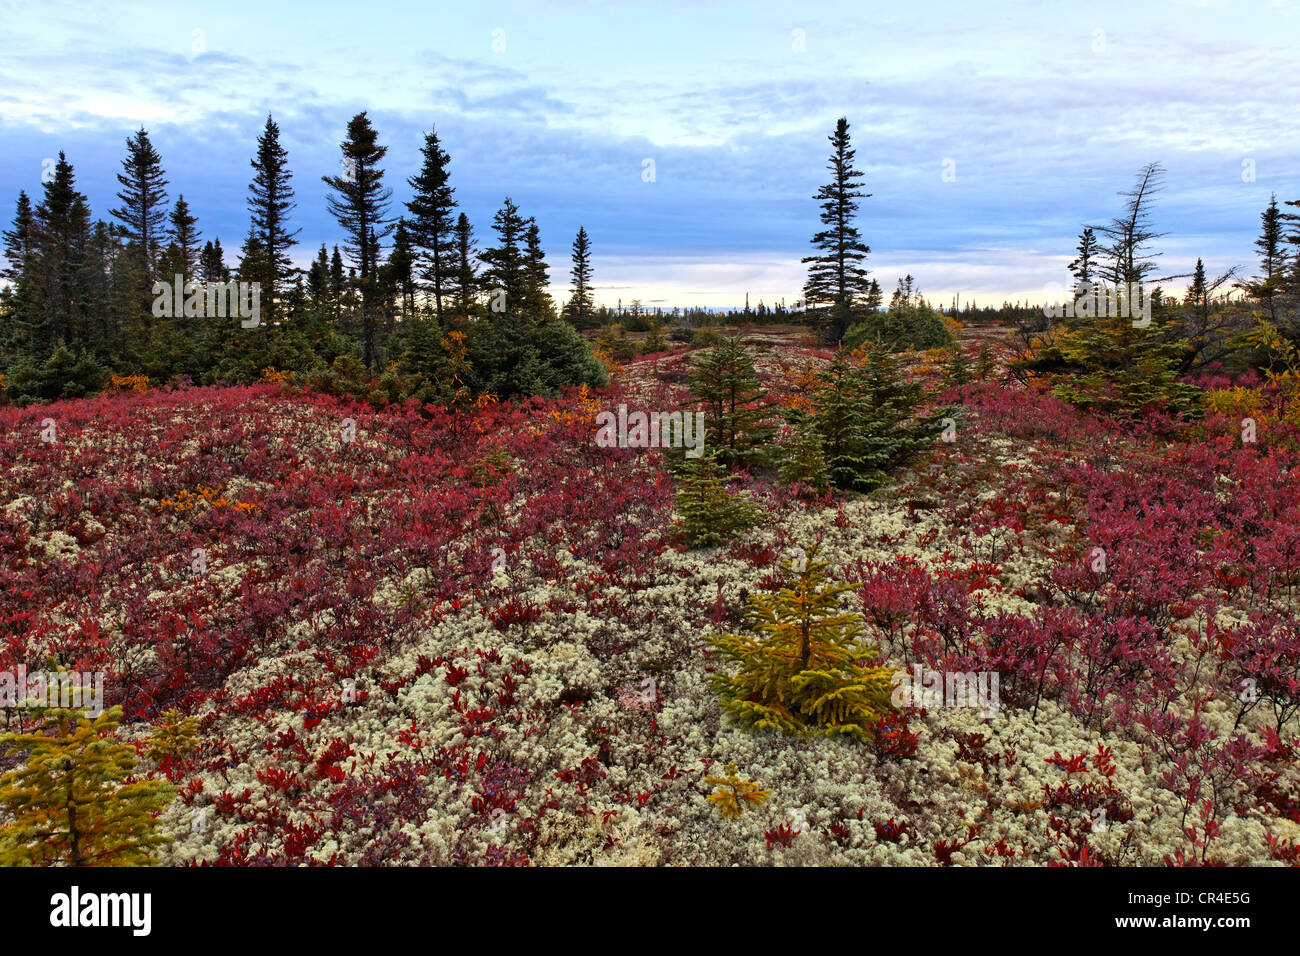 Boreal forest along St Lawrence river, Black Spruce (Picea mariana) and Northern Highbush Blueberry (Vaccinium corymbosum) Stock Photo